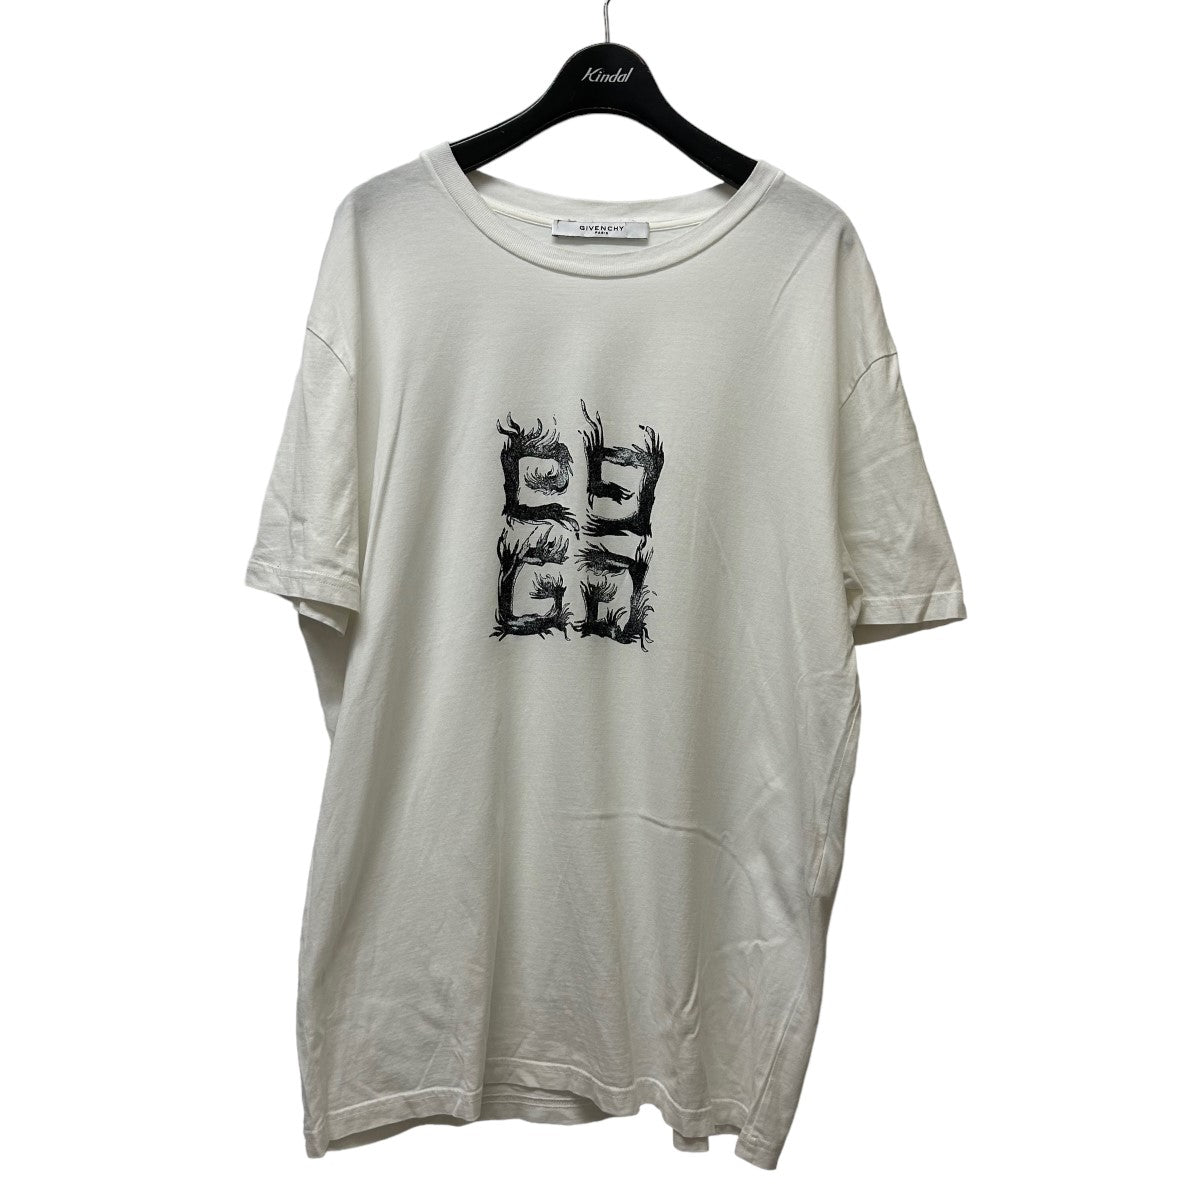 GIVENCHY(ジバンシィ) 4G Flame logo print T-shirtプリントTシャツ 